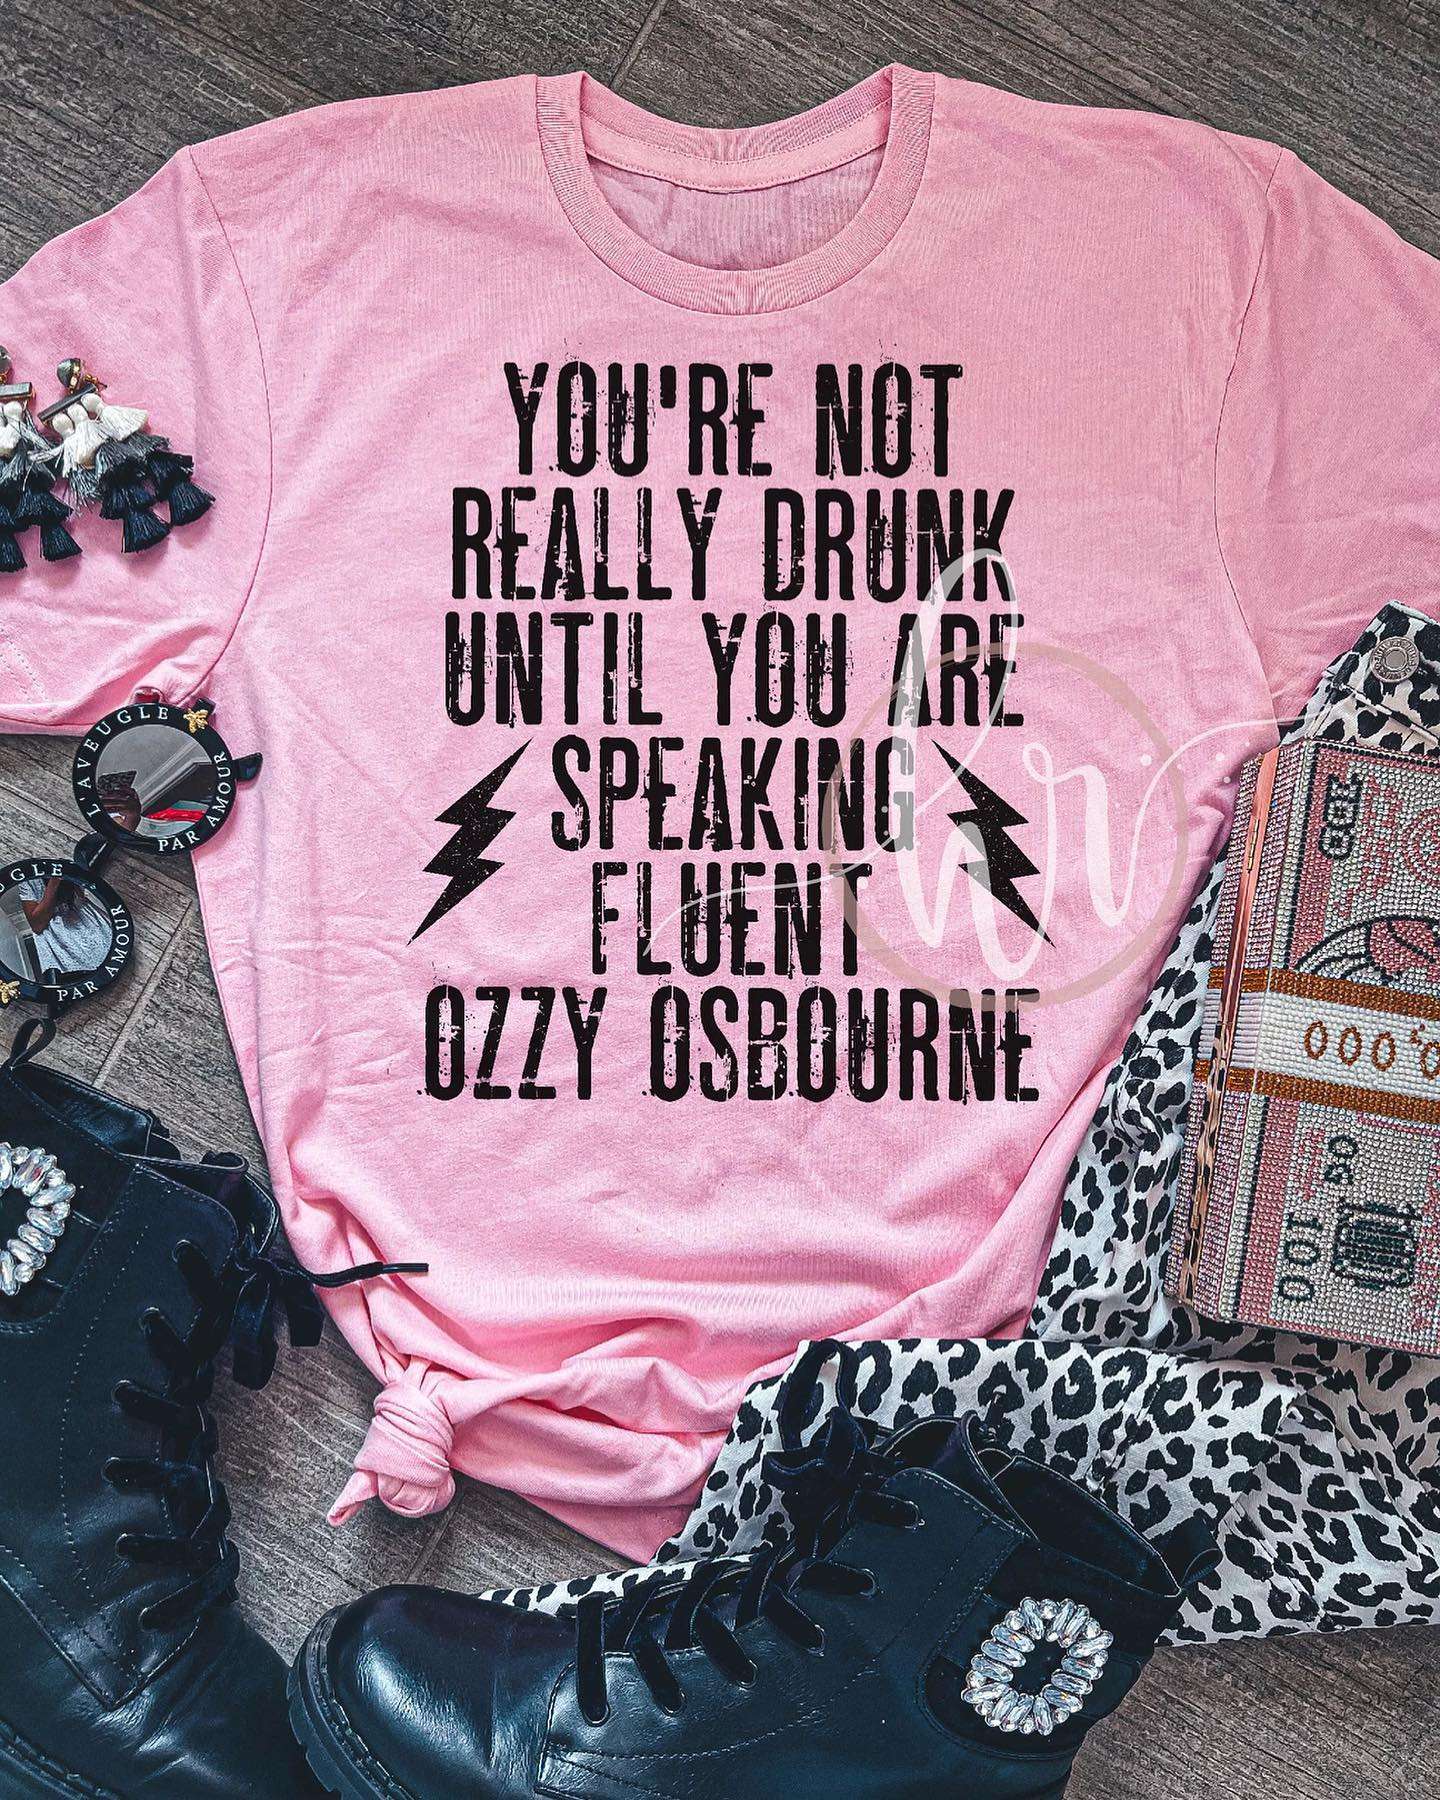 You're not really drunk until you are speaking fluent ozzy osbourne